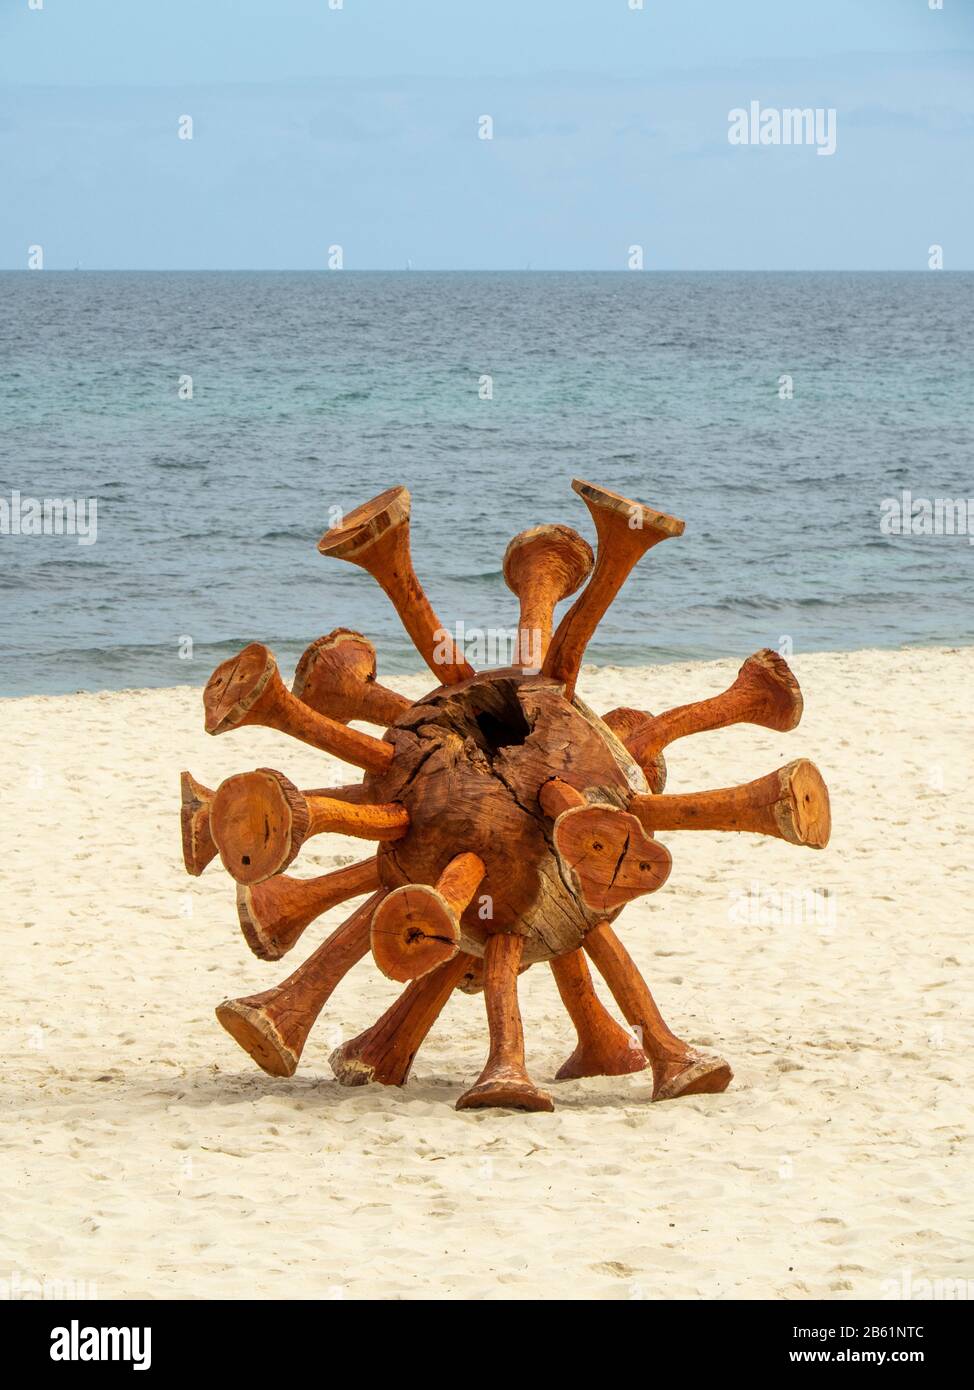 Wooden Viral Escapade by Marcus Tatton sculptor artist at Sculpture by the Sea exhibition Cottesloe Beach Perth WA Australia Stock Photo